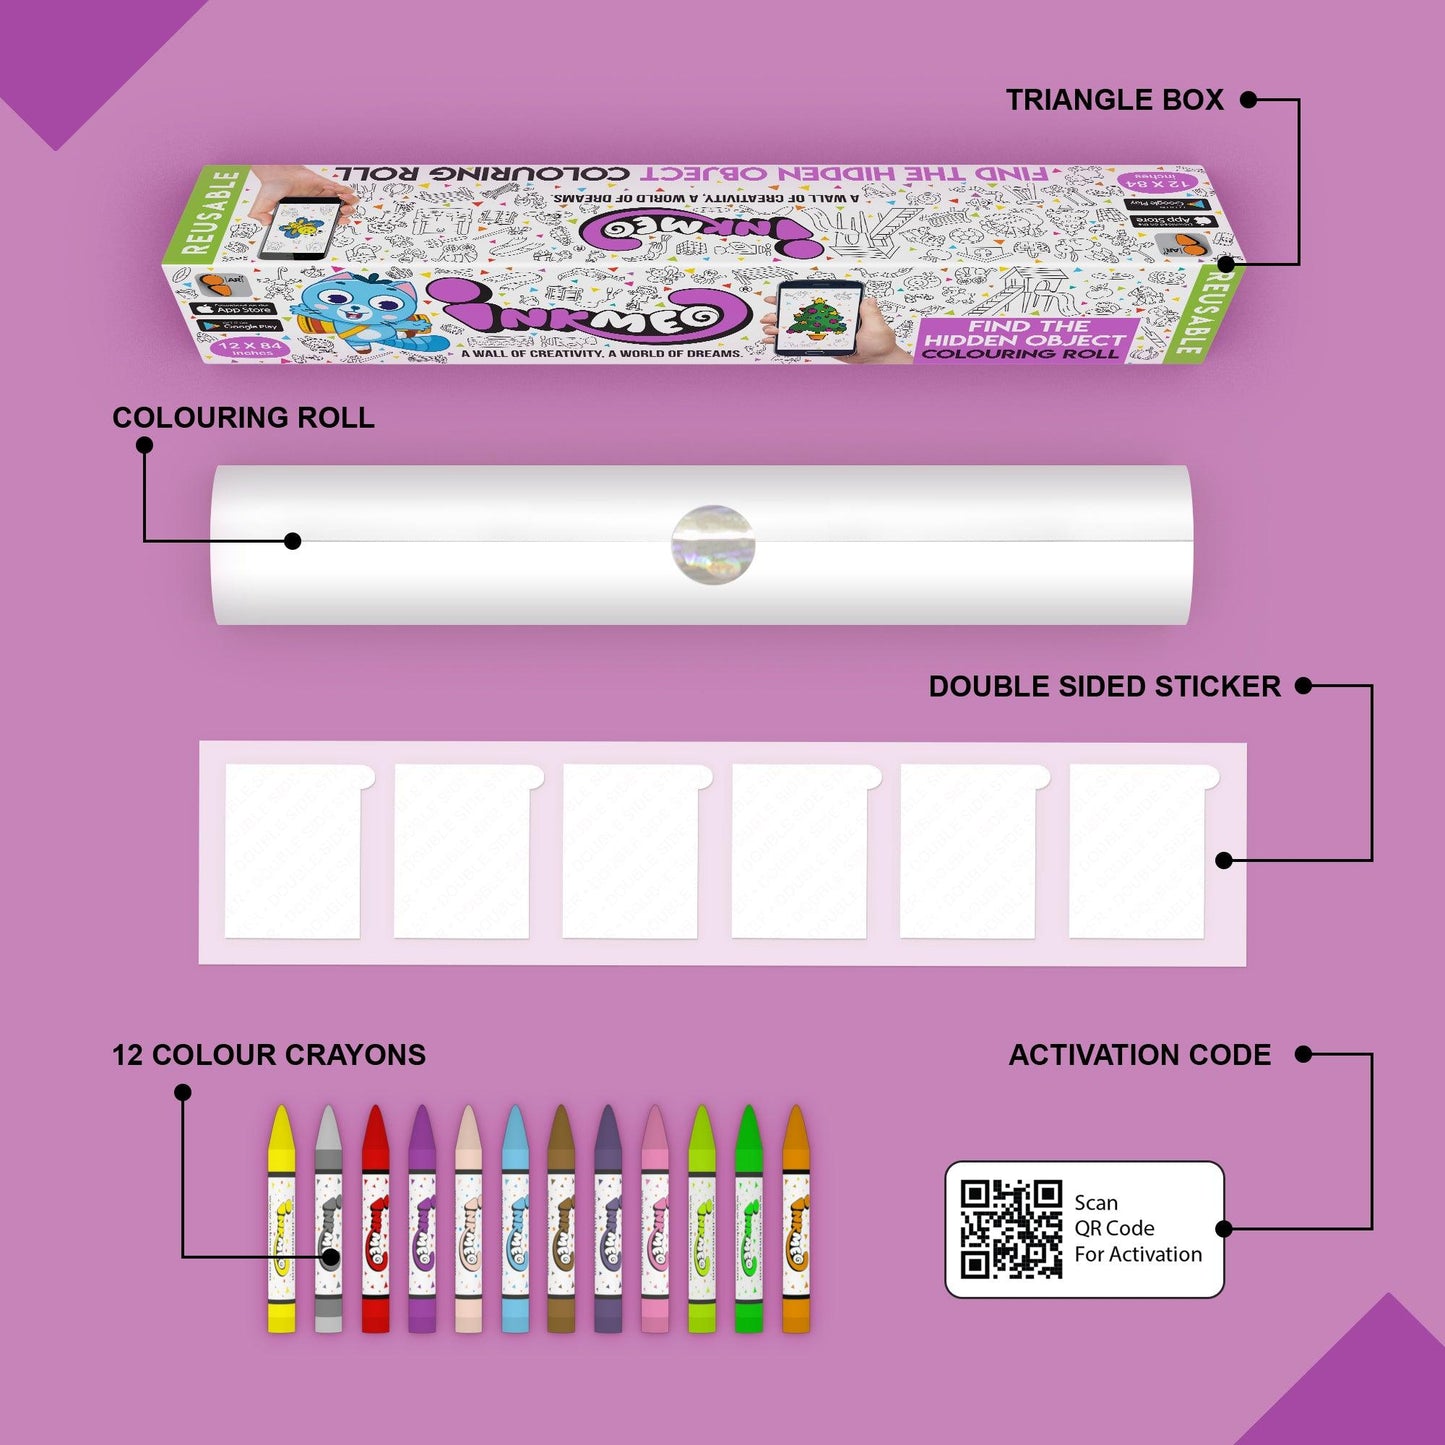 The image depicts a purple background with a single triangular box, a coloring roll, 6 double-sided stickers, 12 colored crayons, and an activation code